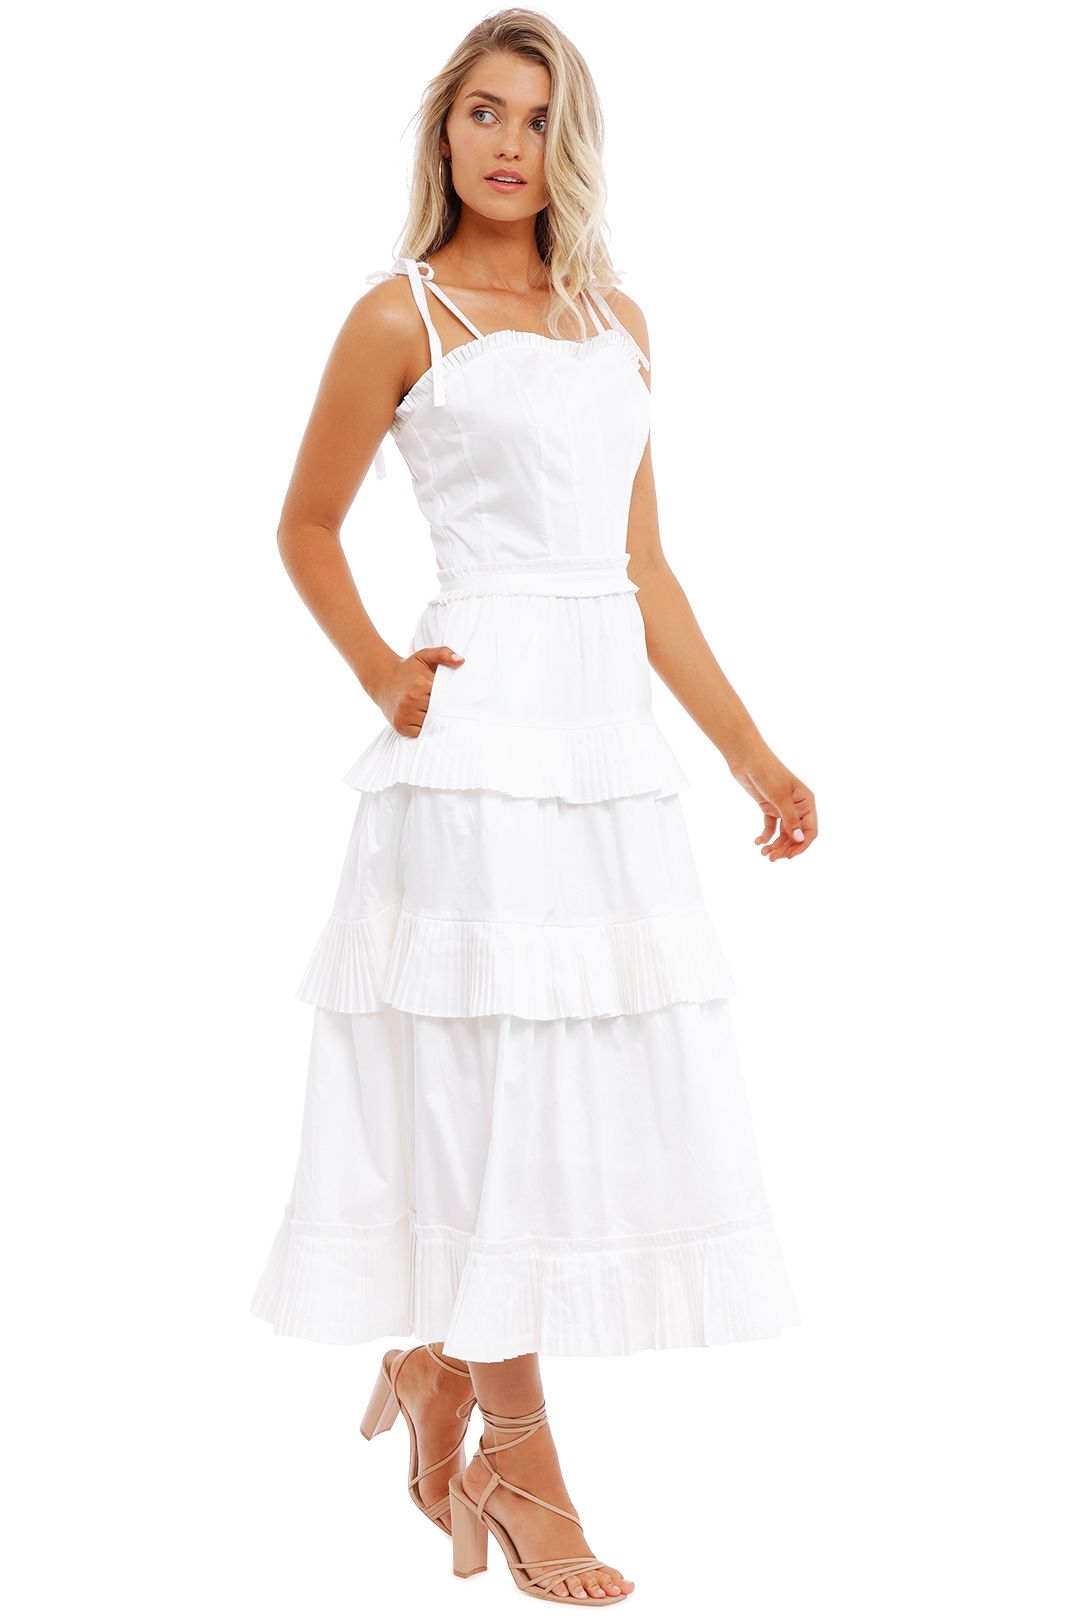 Ministry of Style Golden Fields Pleated Midi Dress White pleat